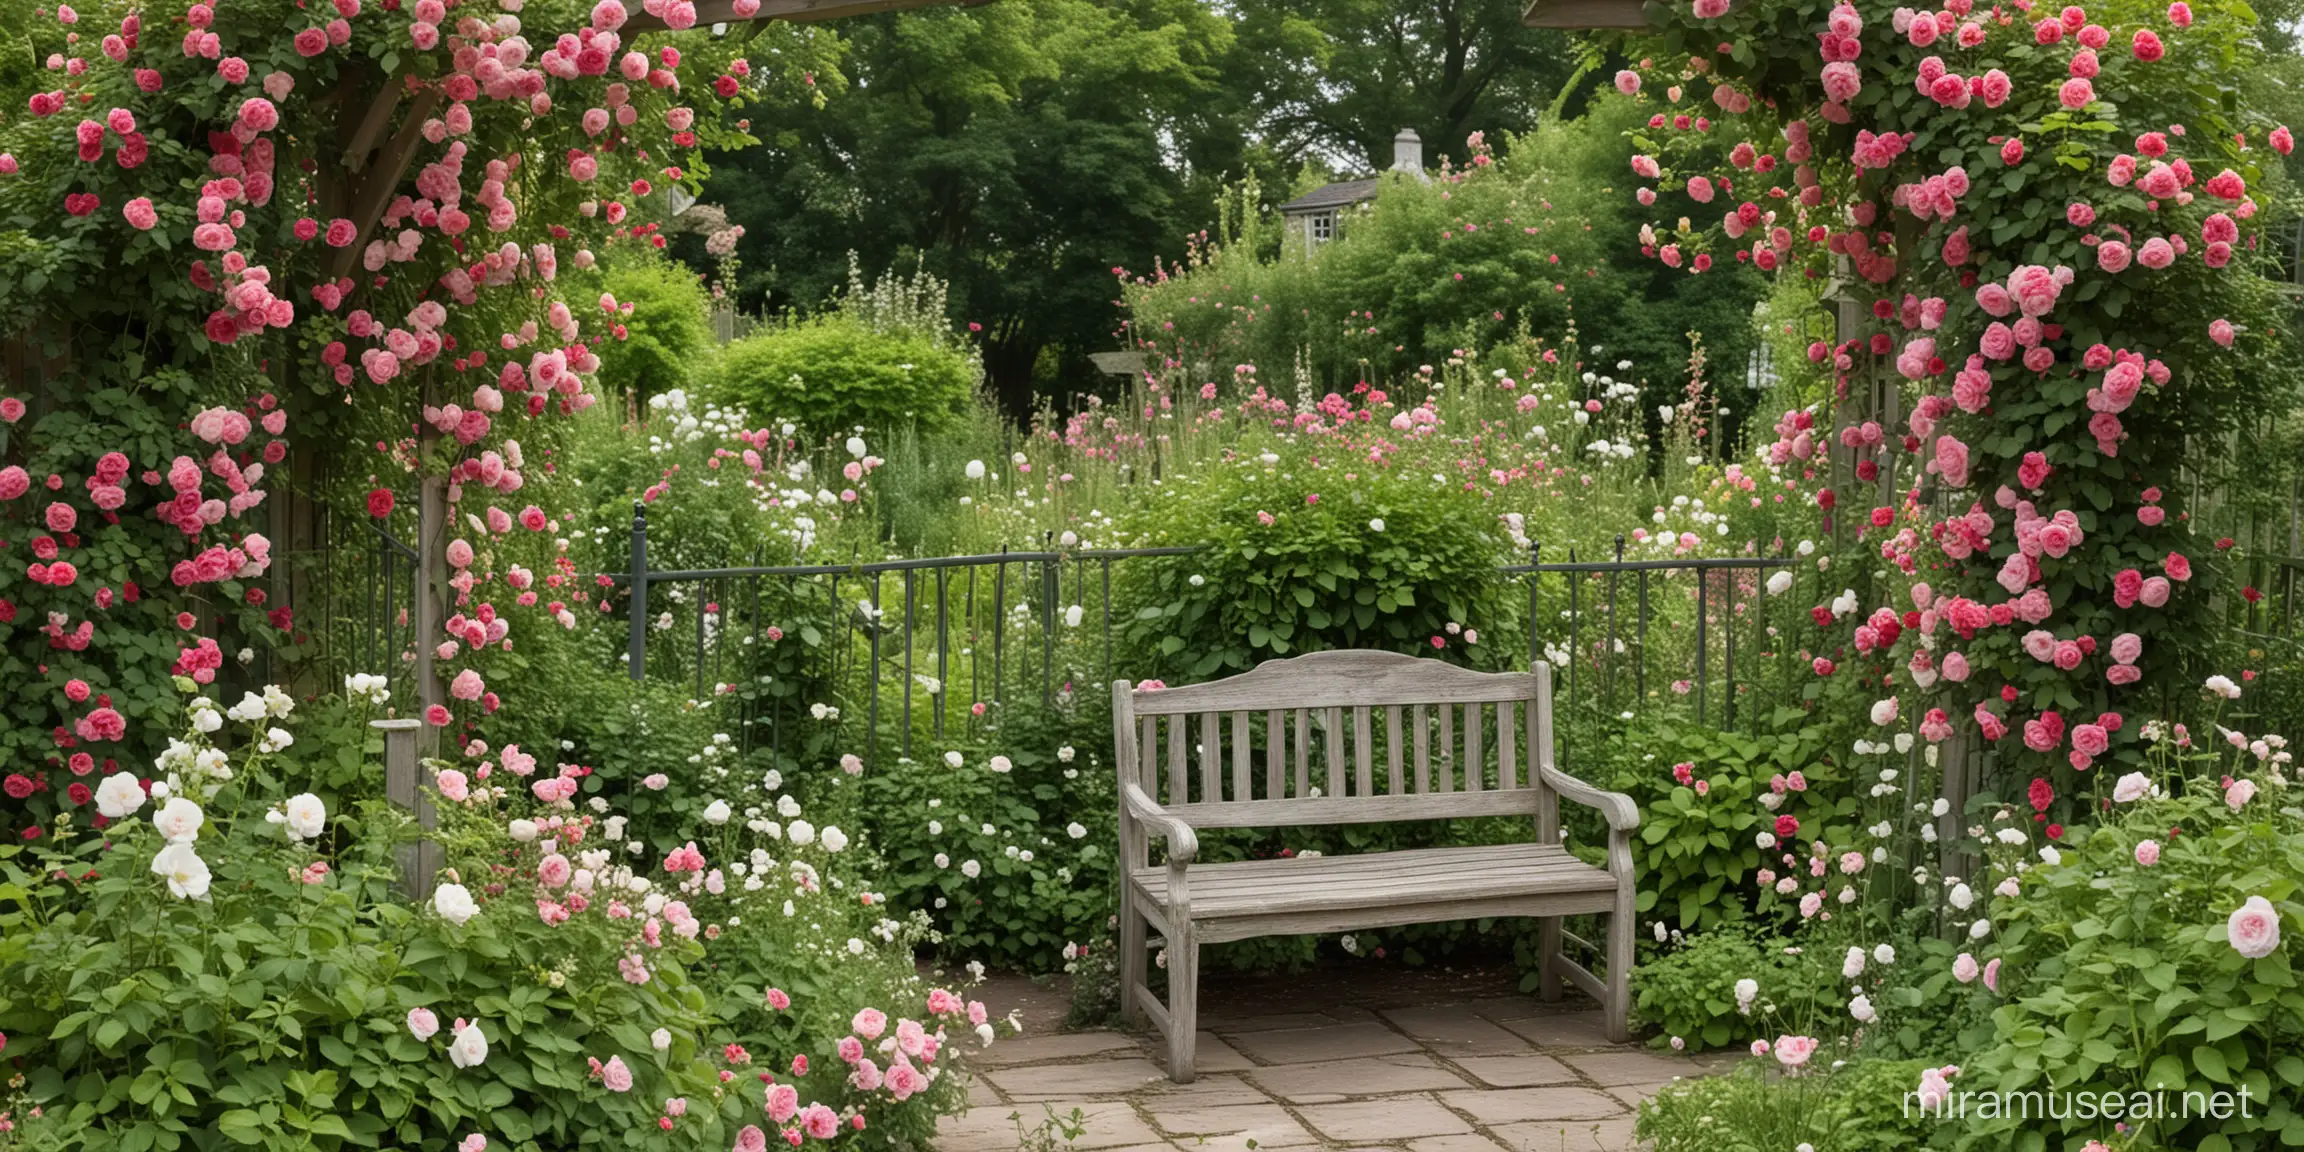 A romantic English cottage garden filled with climbing roses and hollyhocks, a rustic wooden bench nestled beneath a flowering arbor, the sound of a bubbling fountain in the background, attracting birds and creating a soothing ambiance